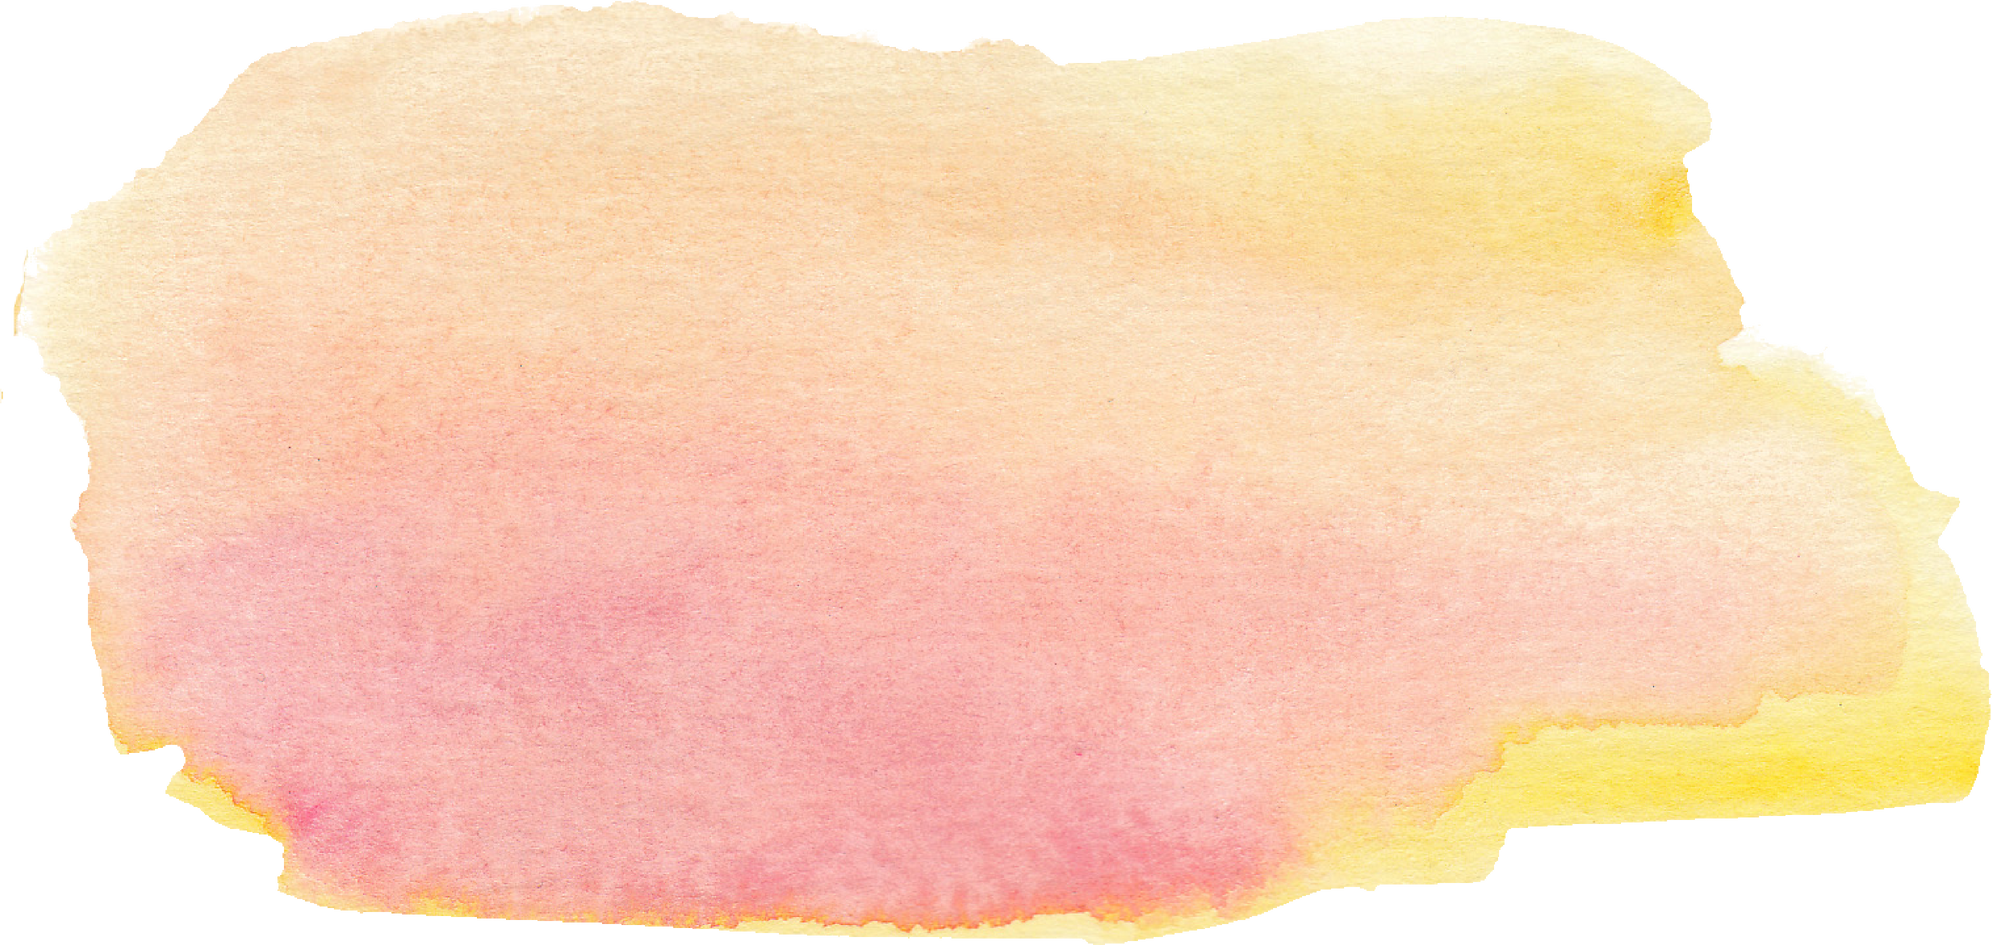 Pink and Yellow Watercolor Textures